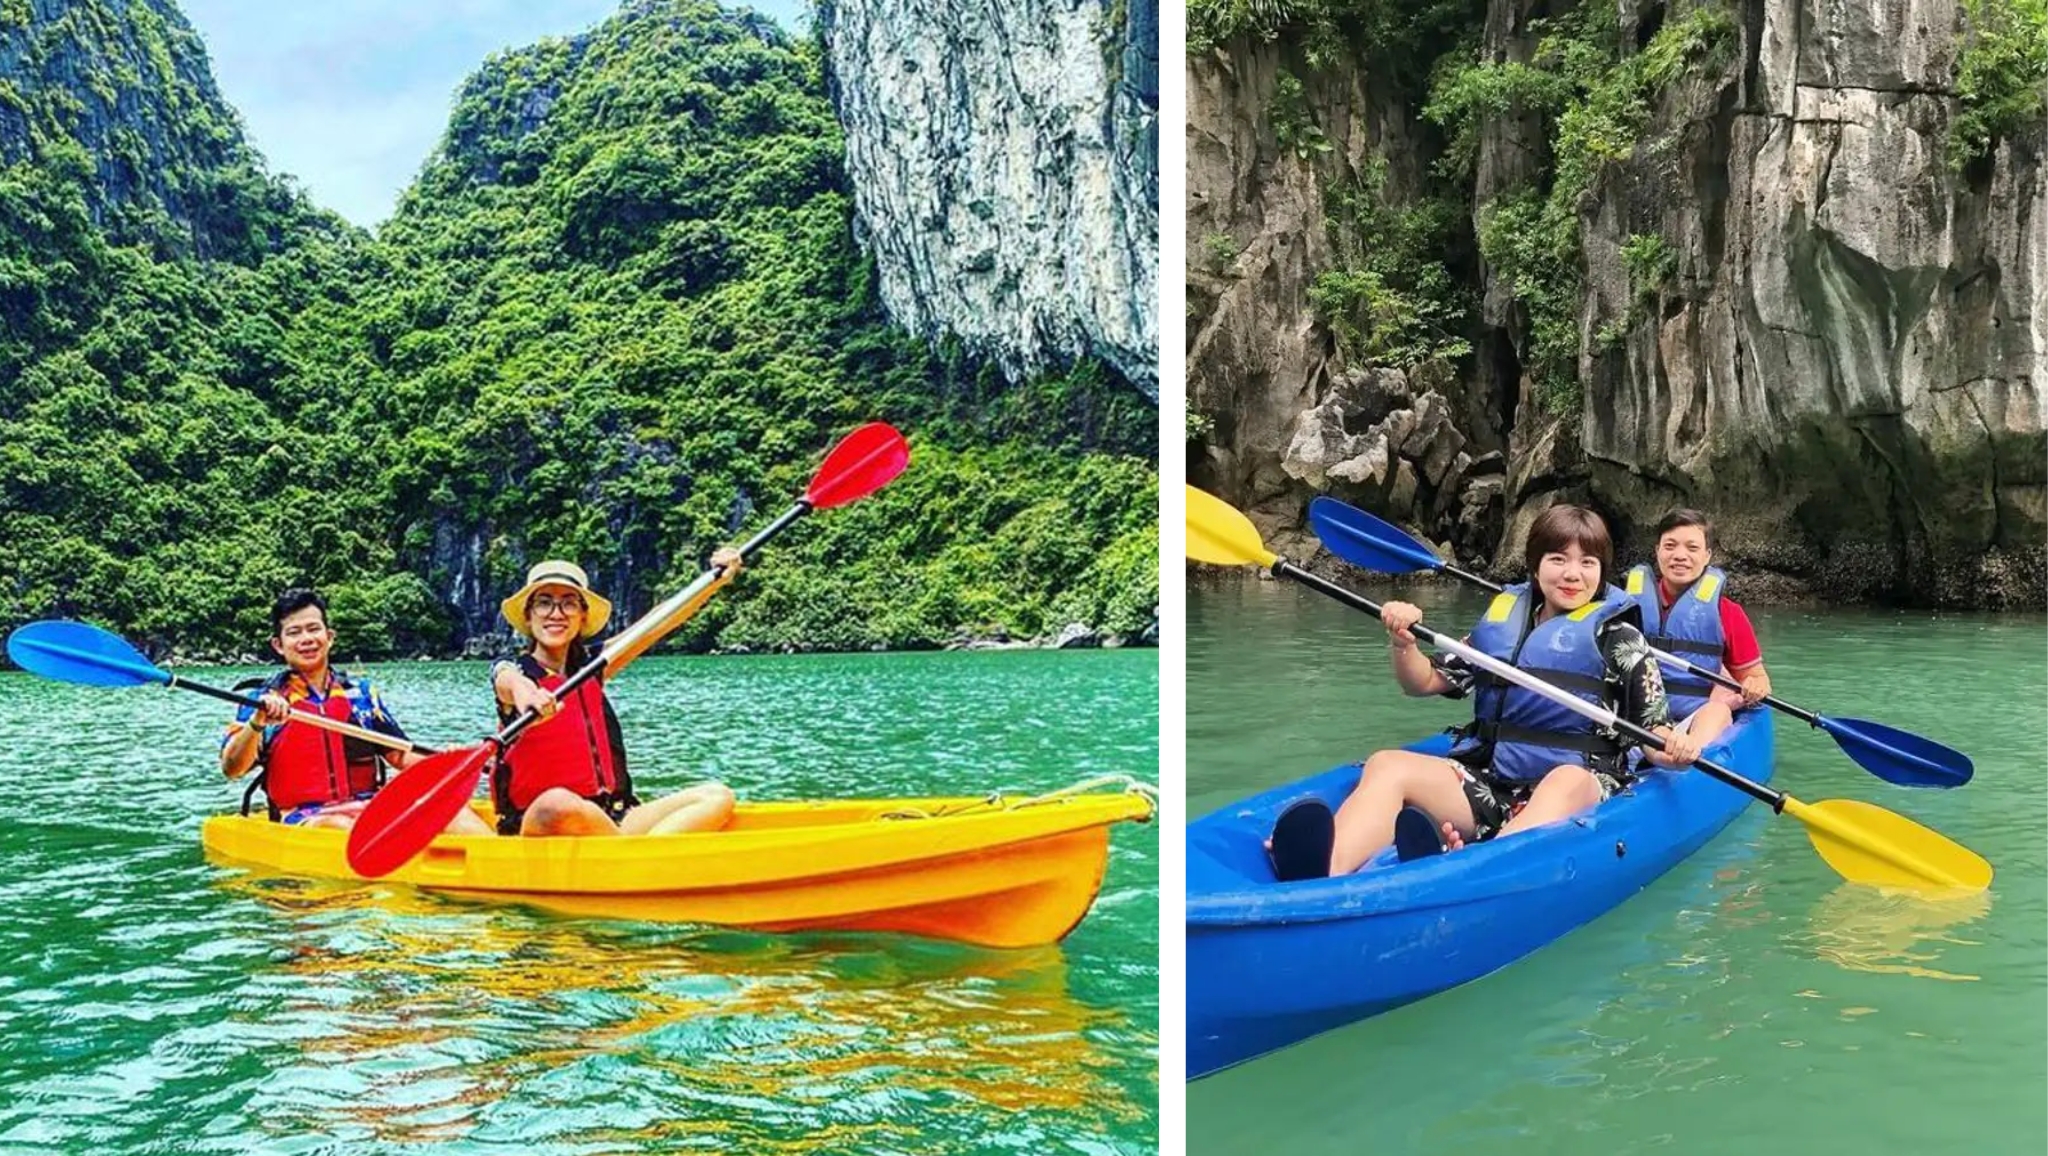 Luon Cave Is An Ideal Place For Kayaking